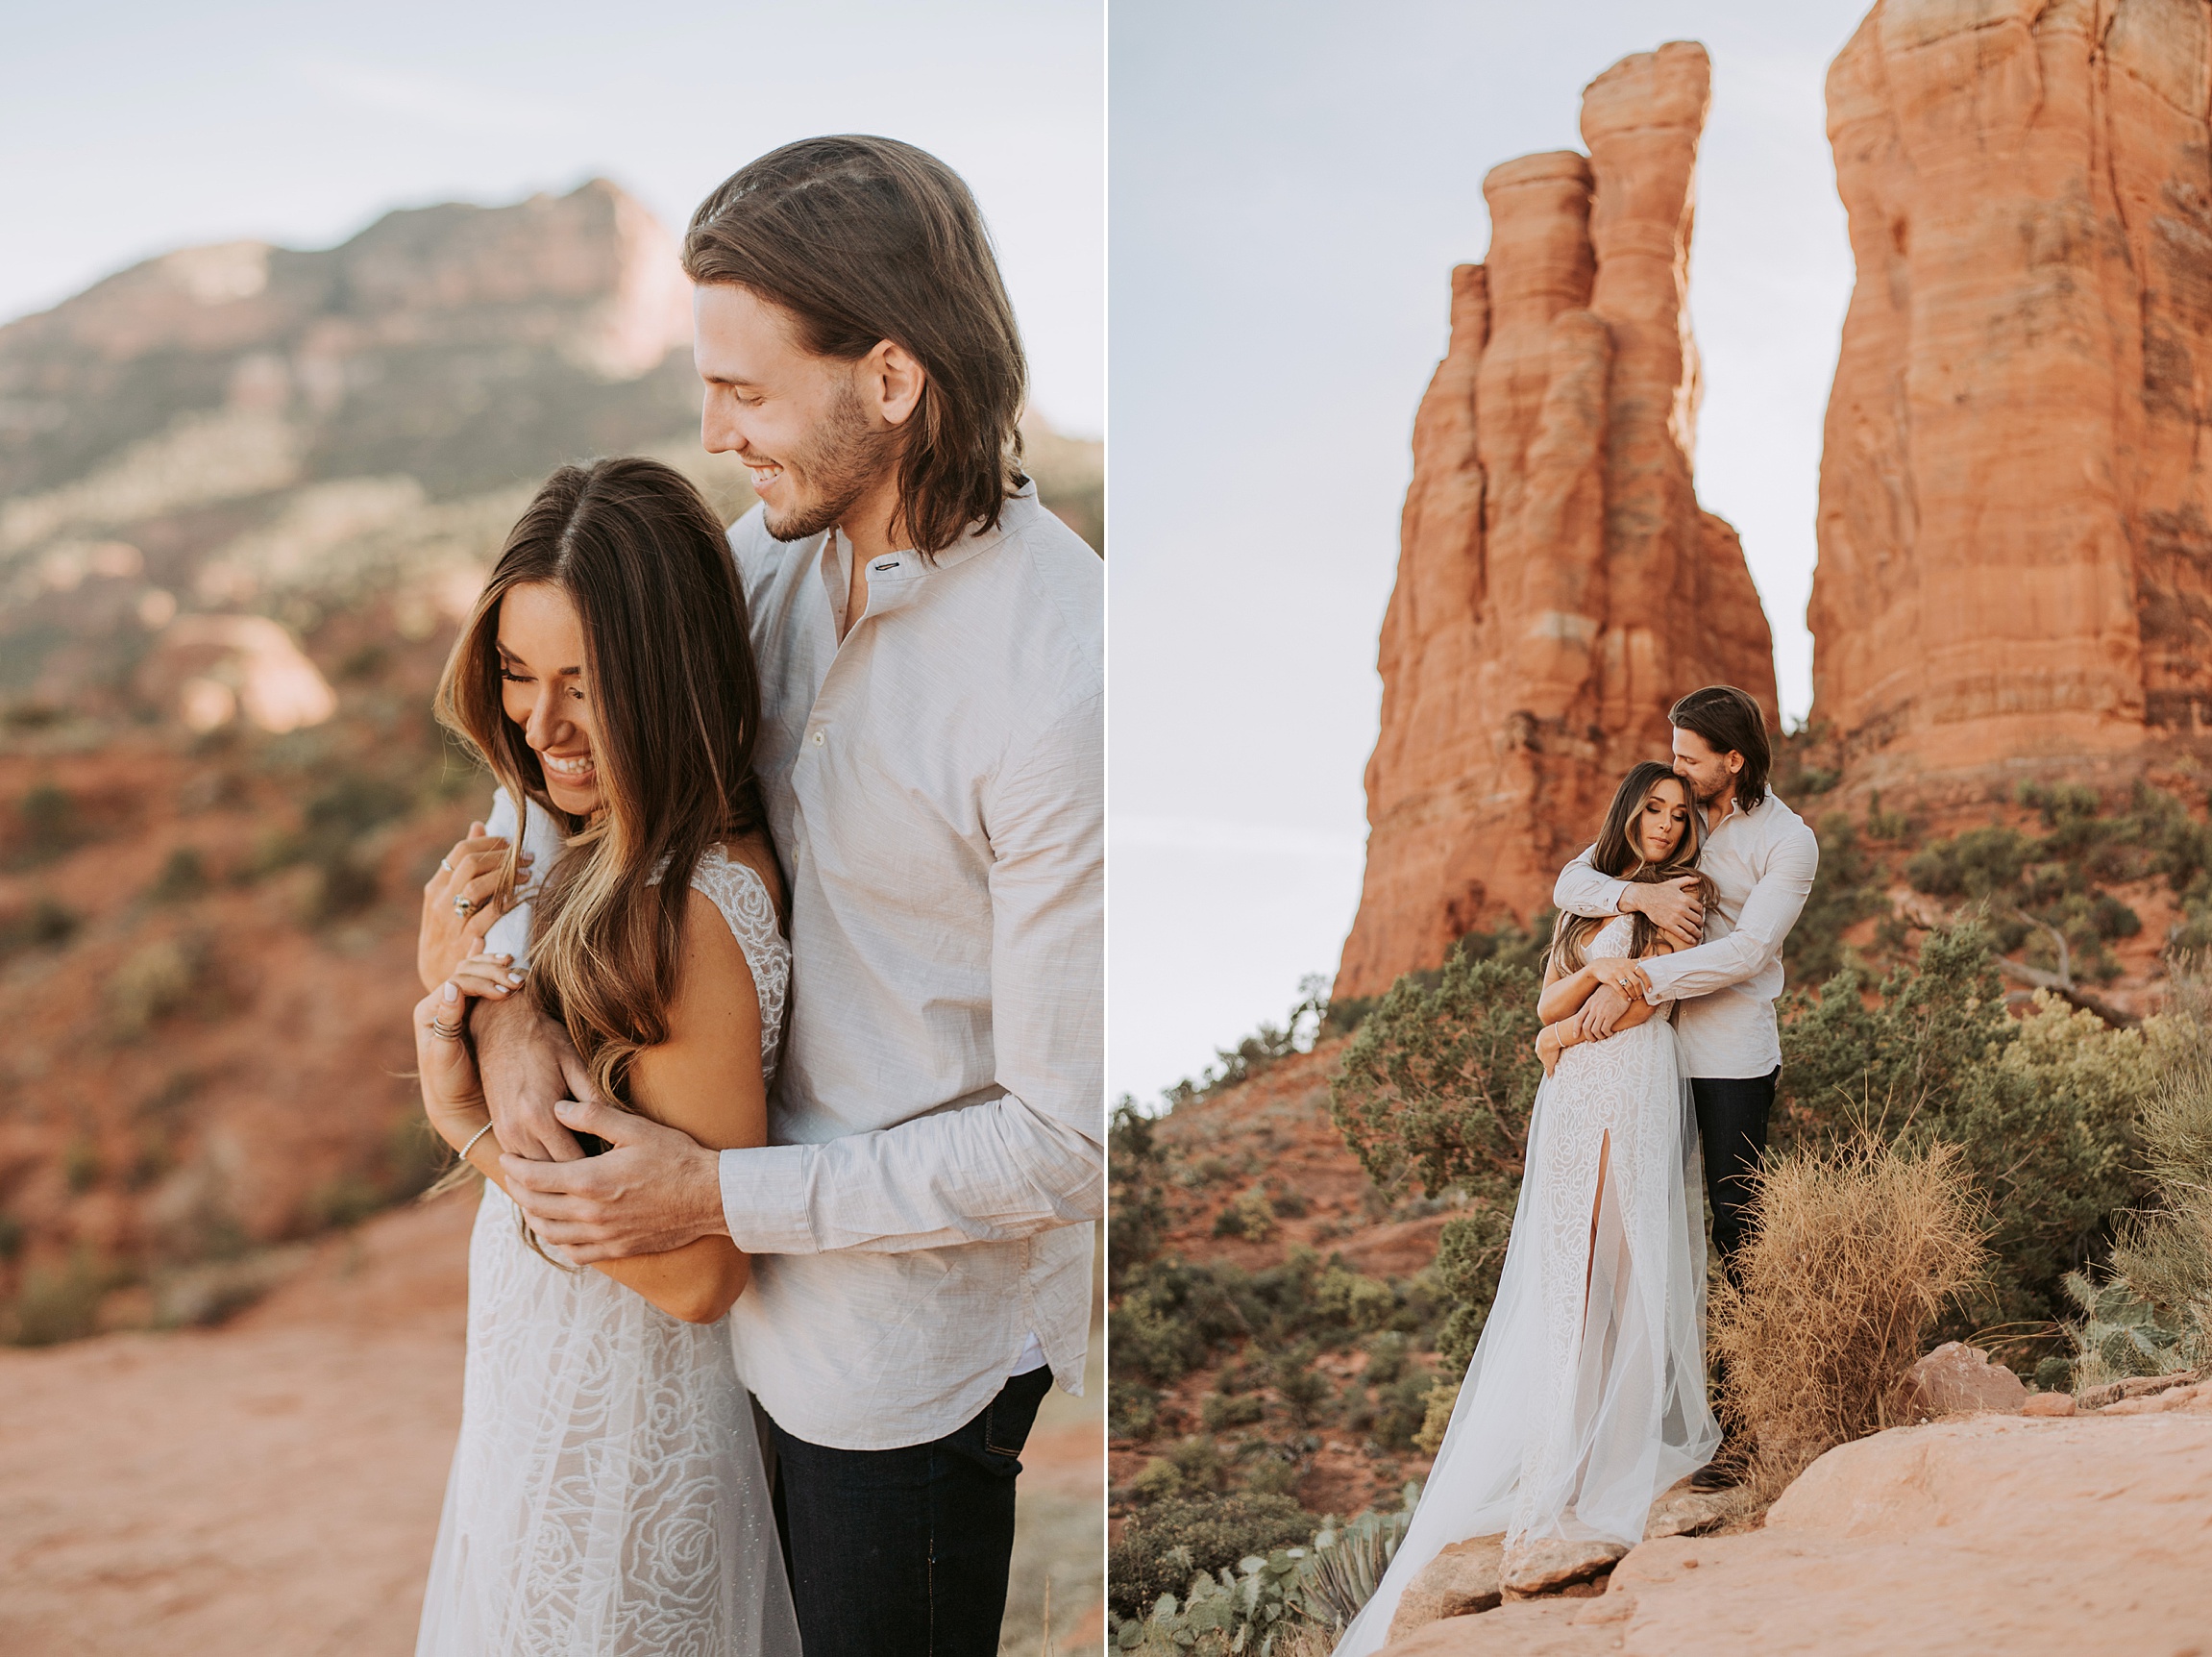 Engagement in Sedona AZ, Elopement in Sedona, Bride and Groom, Harley Davidson Motorcycle, Le Laurier Bridal, Adventurous Elopement, Arizona Wedding Photographer, Engaged, Cathedral Rock Elopement, Cathedral Rock Engagement